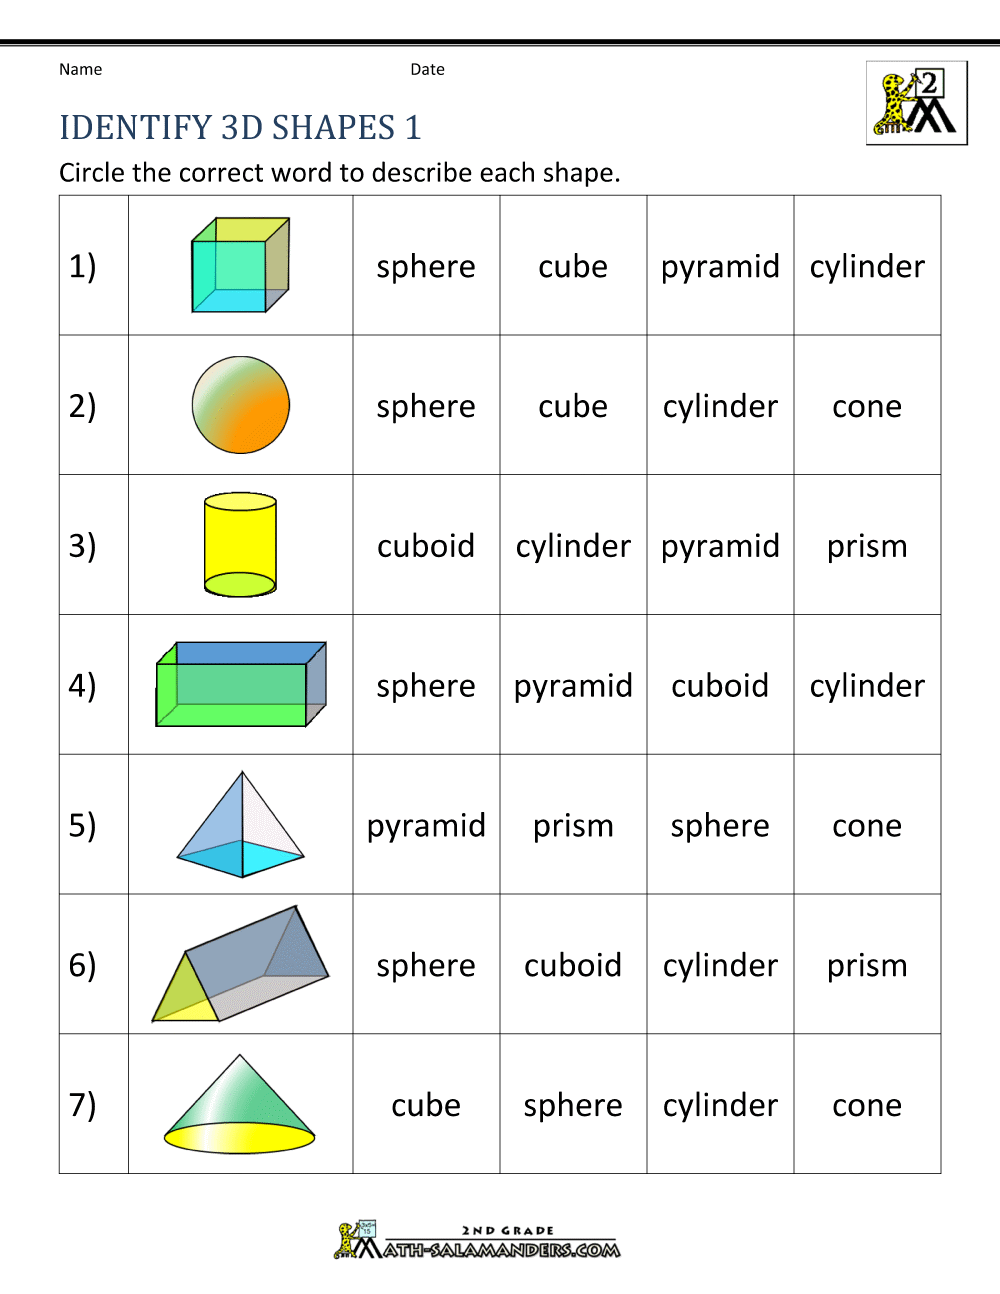 2d geometric shapes labeled vertices